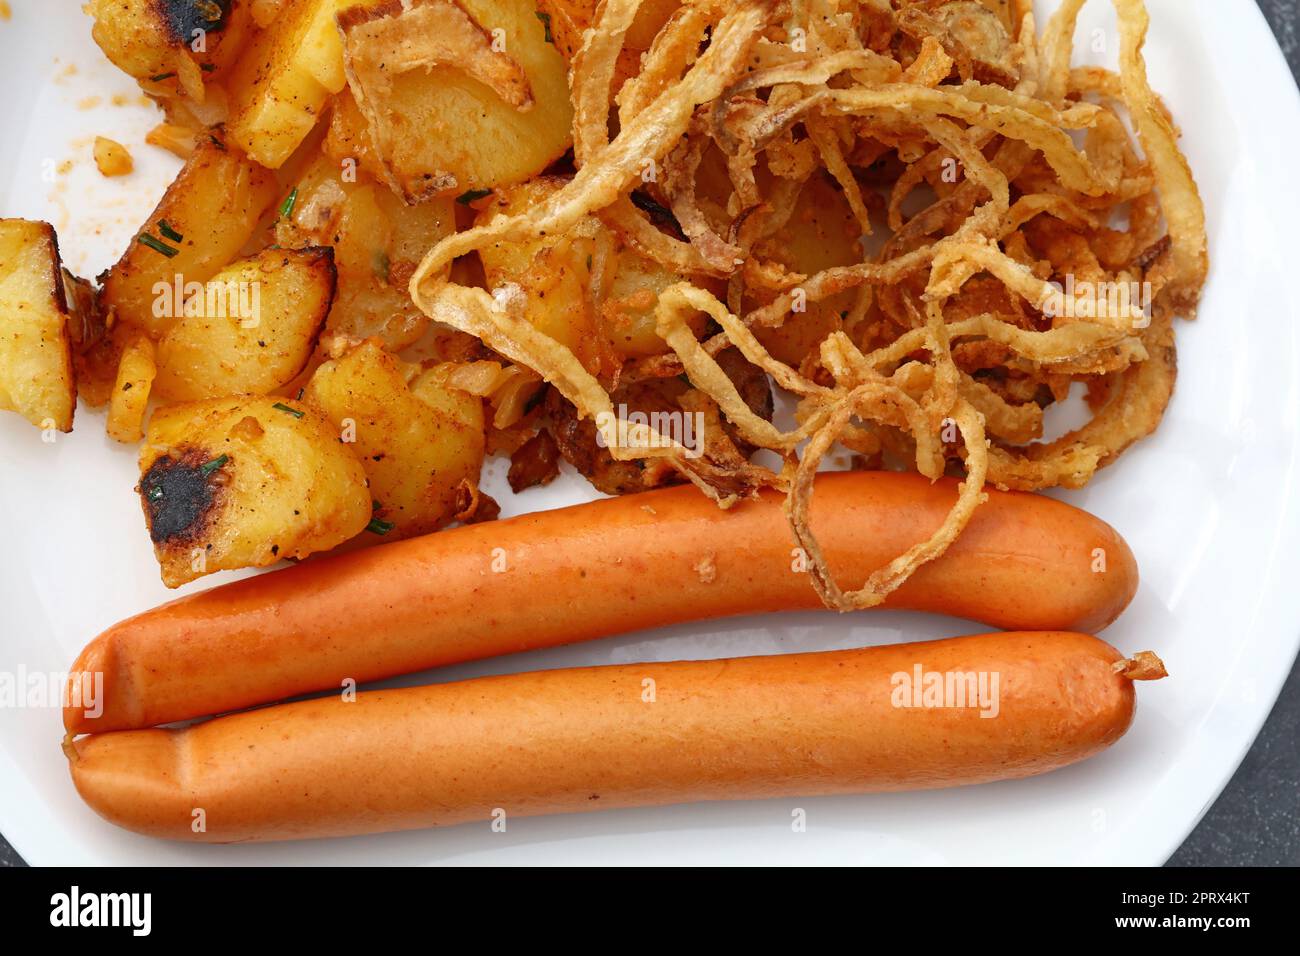 Close up portion of sausages with roasted potato Stock Photo